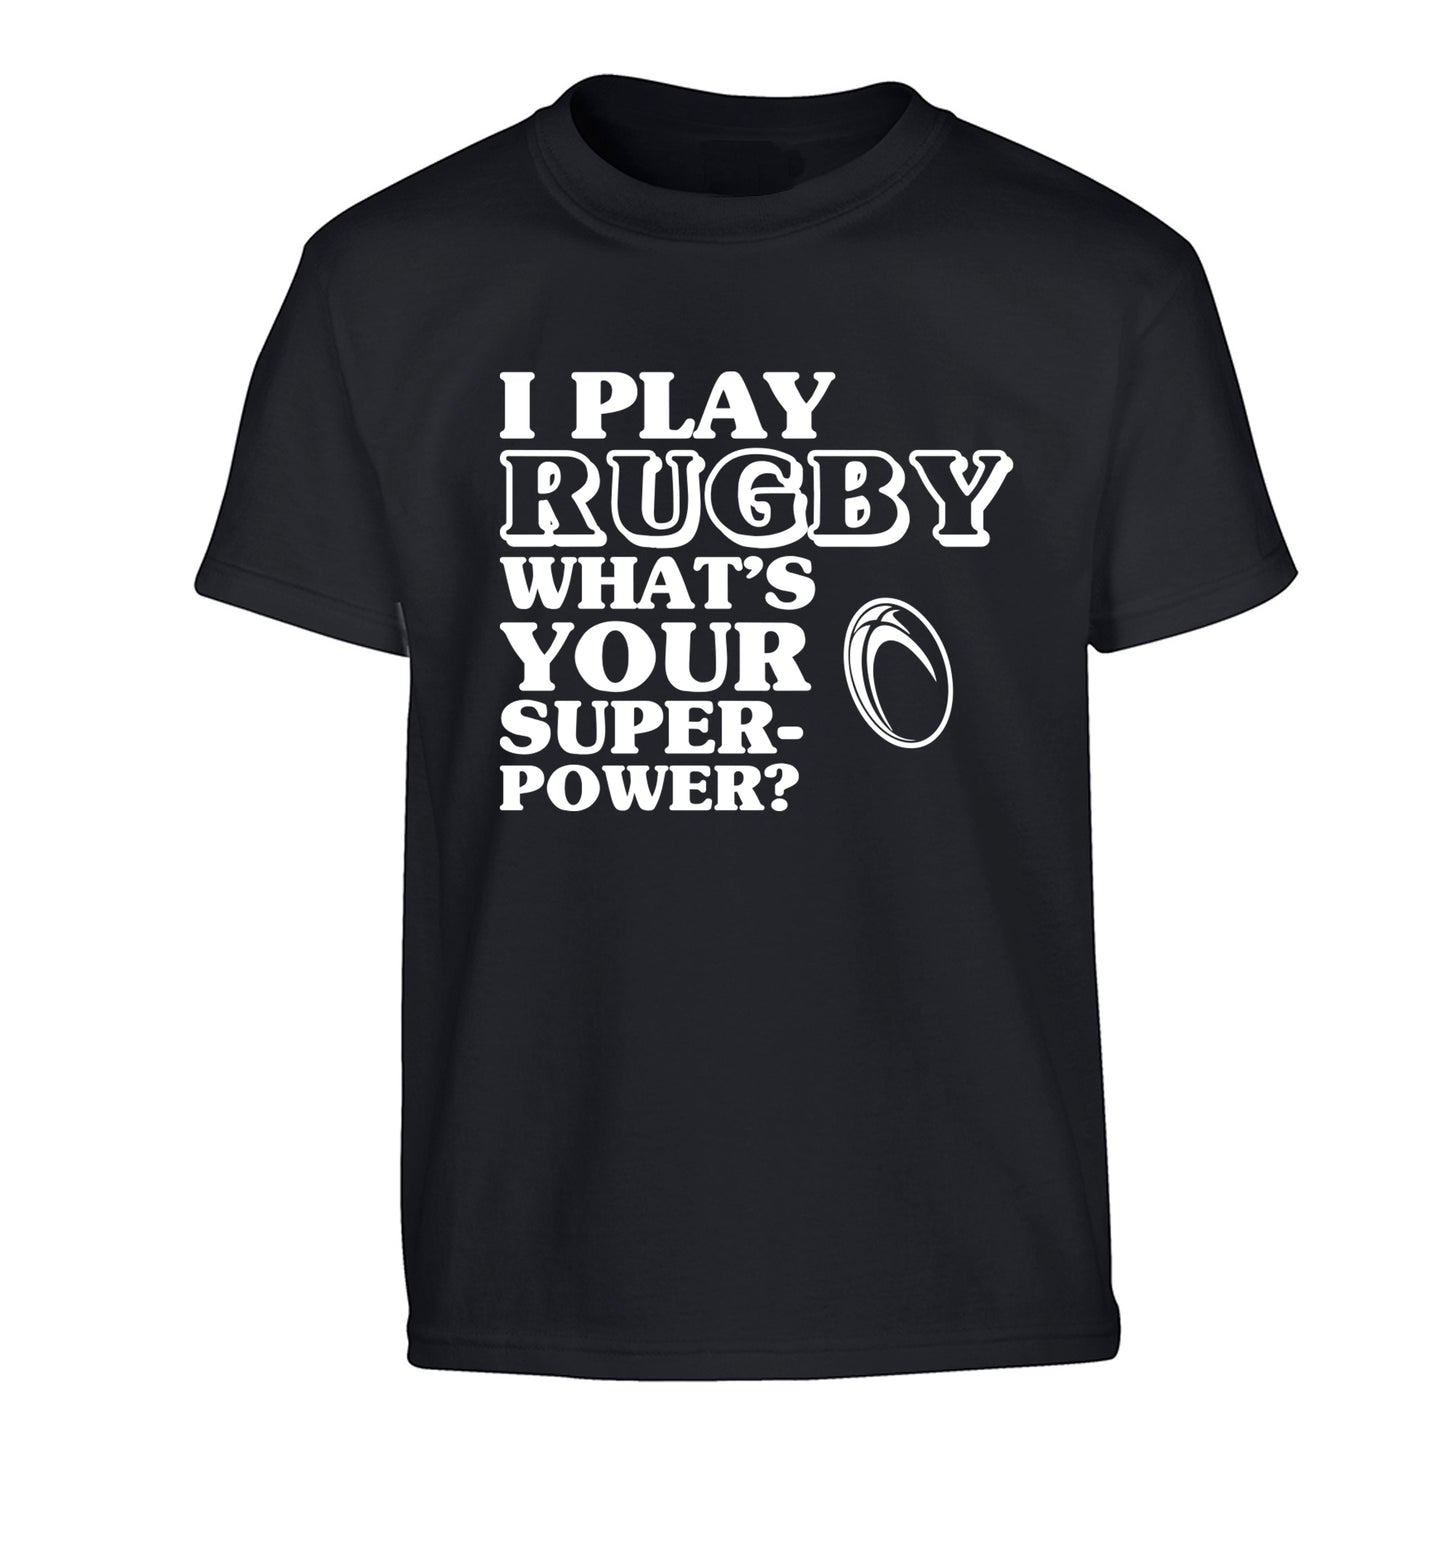 I play rugby what's your superpower? Children's black Tshirt 12-13 Years